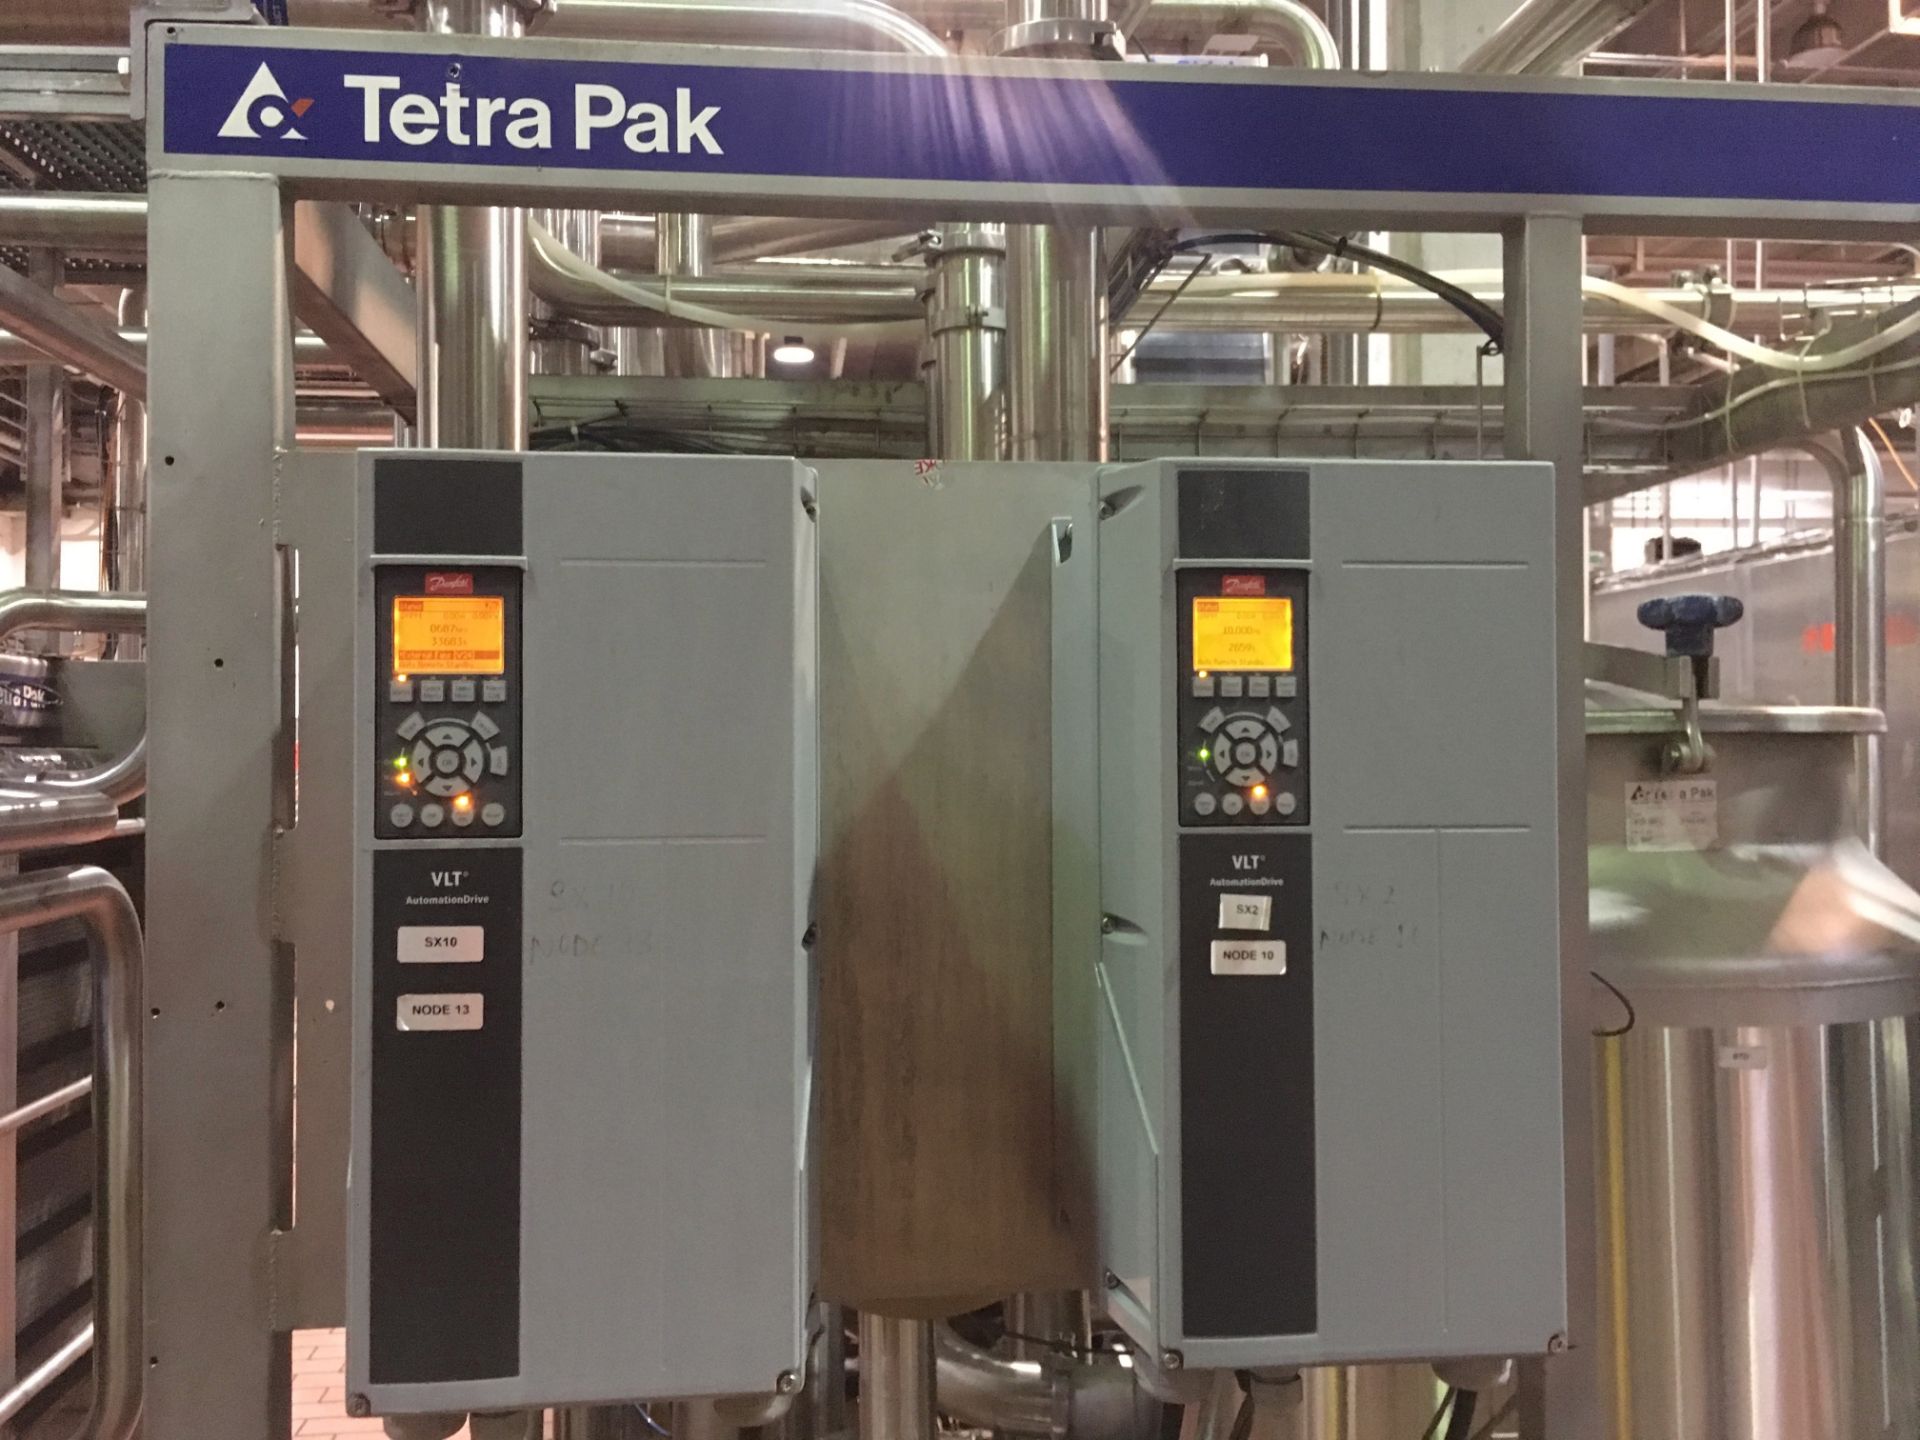 2007 Tetra Pak Skid Mounted HTST Pasteurization System - Rated for 100 GPM - Single Serve Line - Image 11 of 17